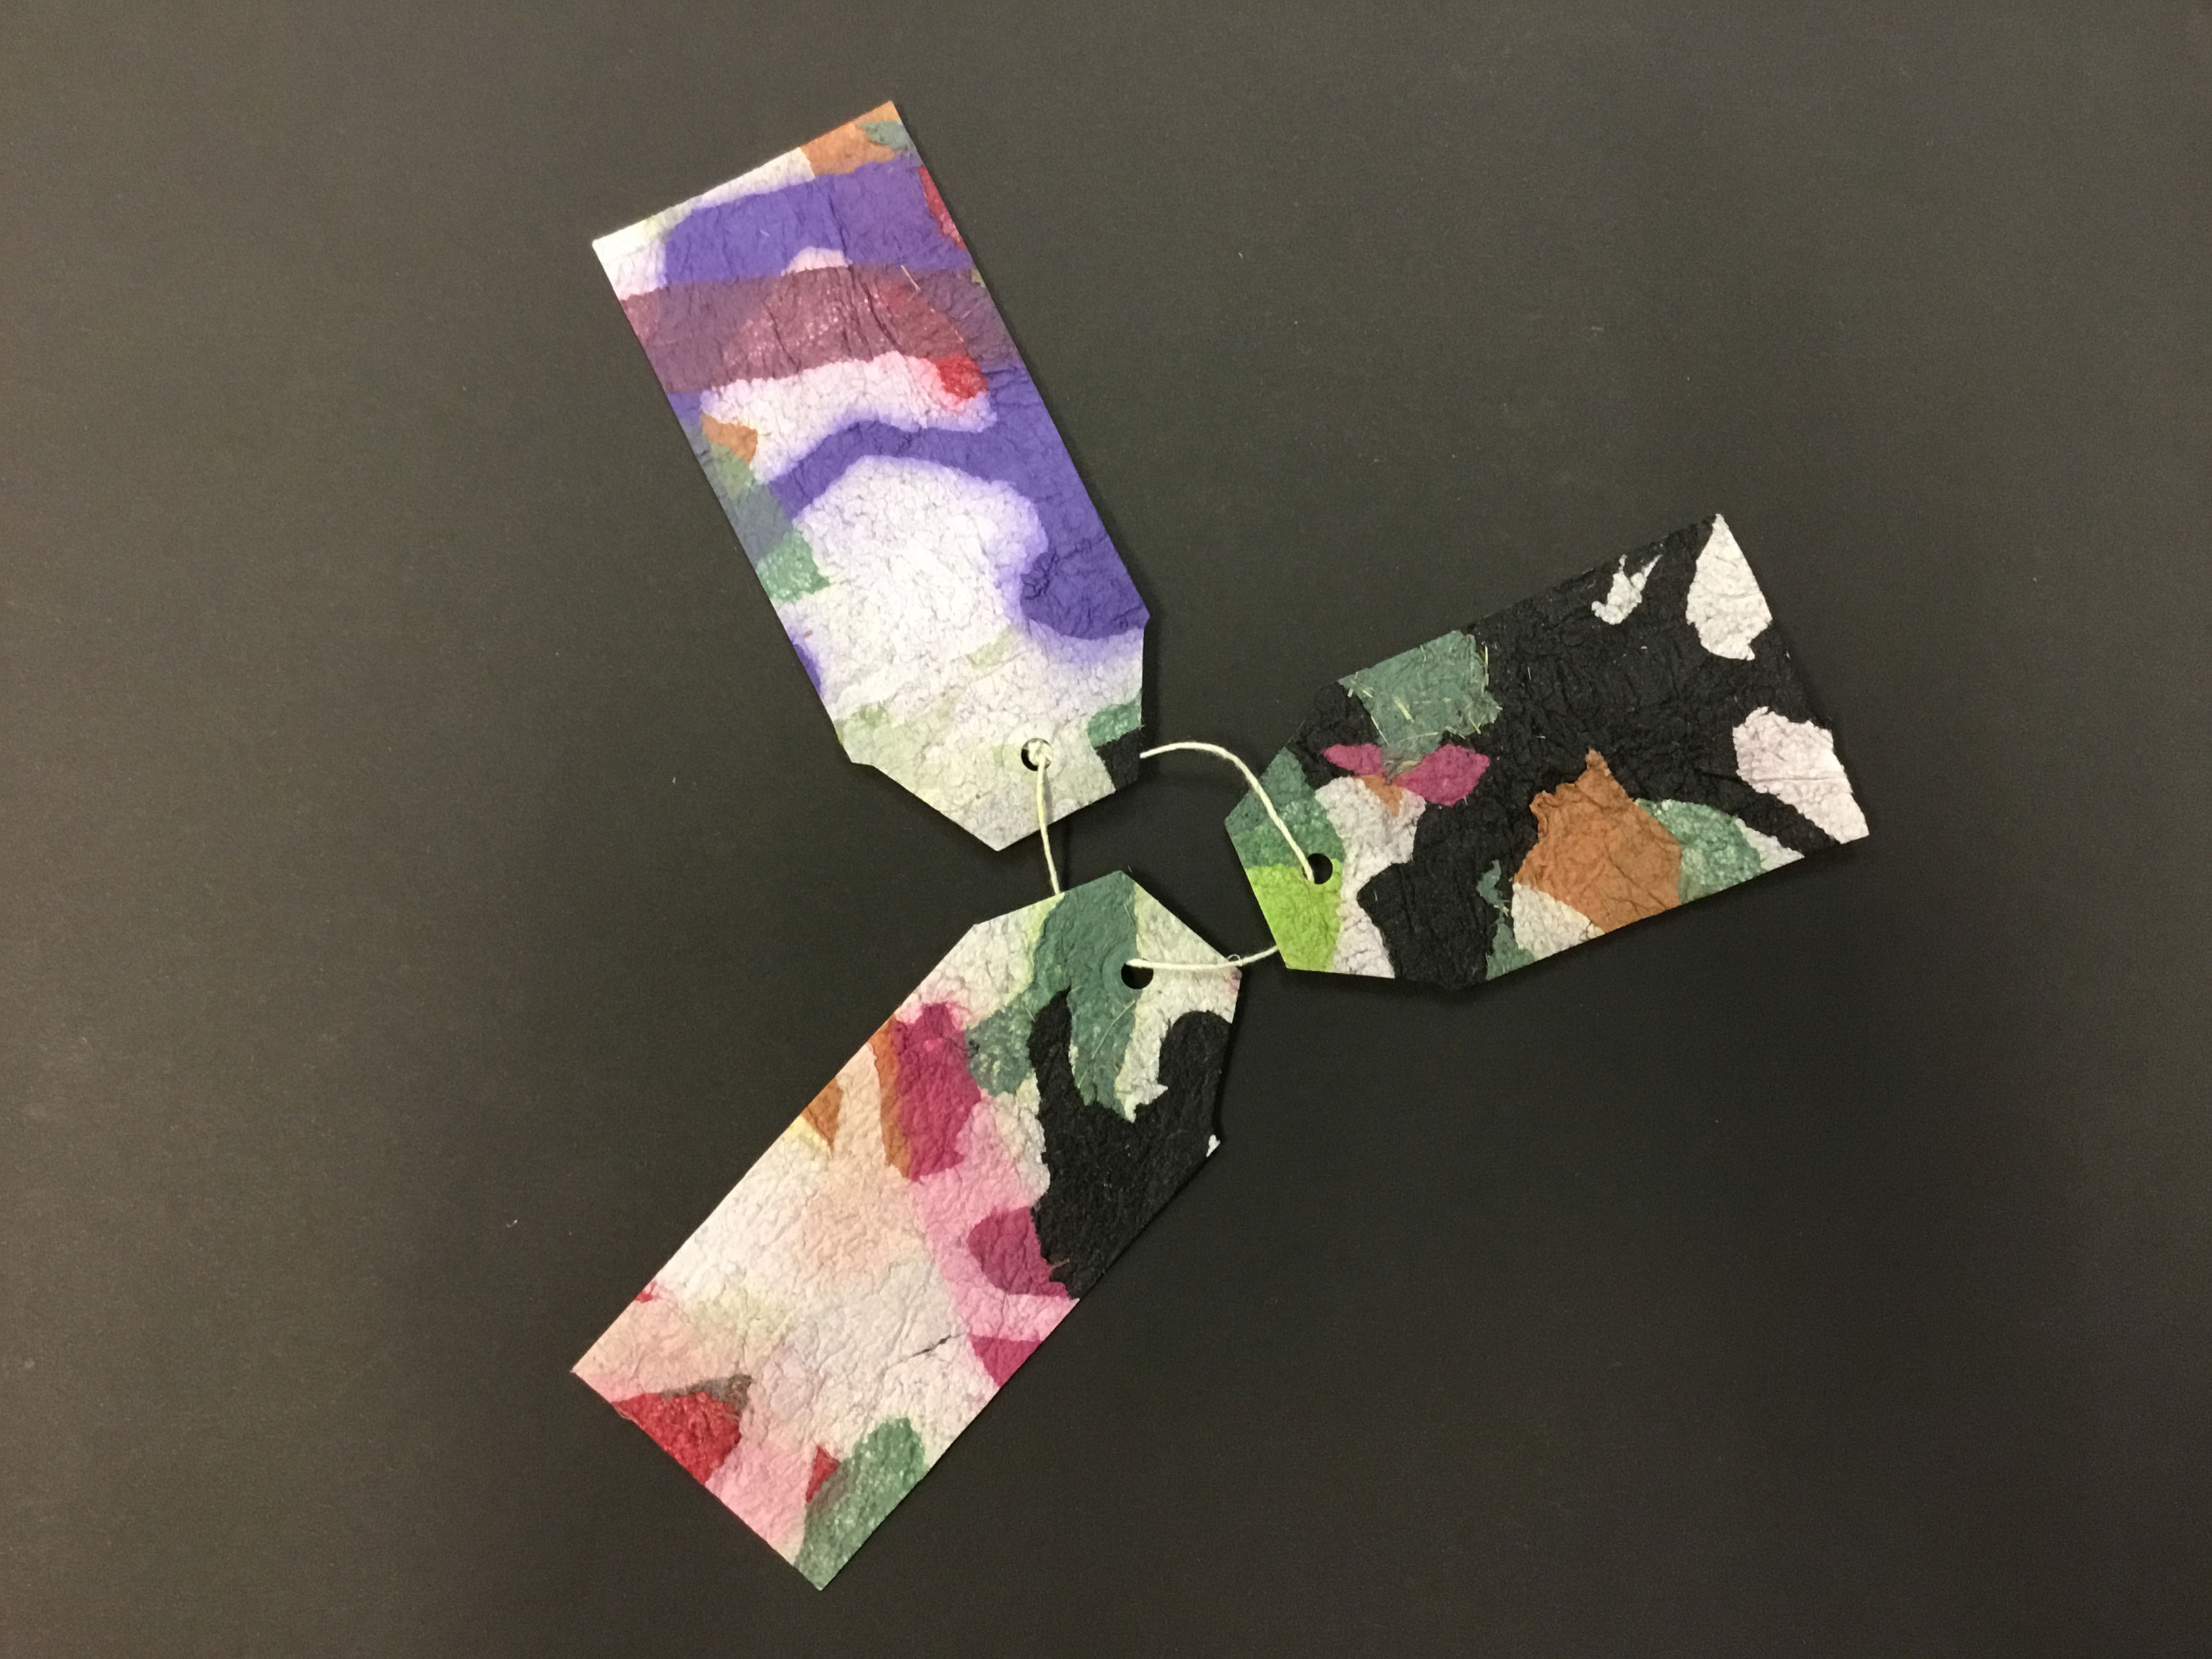 This piece is comprised of three handmade paper “tags” made from the Korean technique known as “joomchi” and created from mulberry paper. The tags are a variety of colors, including purple, blue, green, pink, brown, and white. According to the artist, the illustrations are meant to portray people and abstract suburban landscapes.